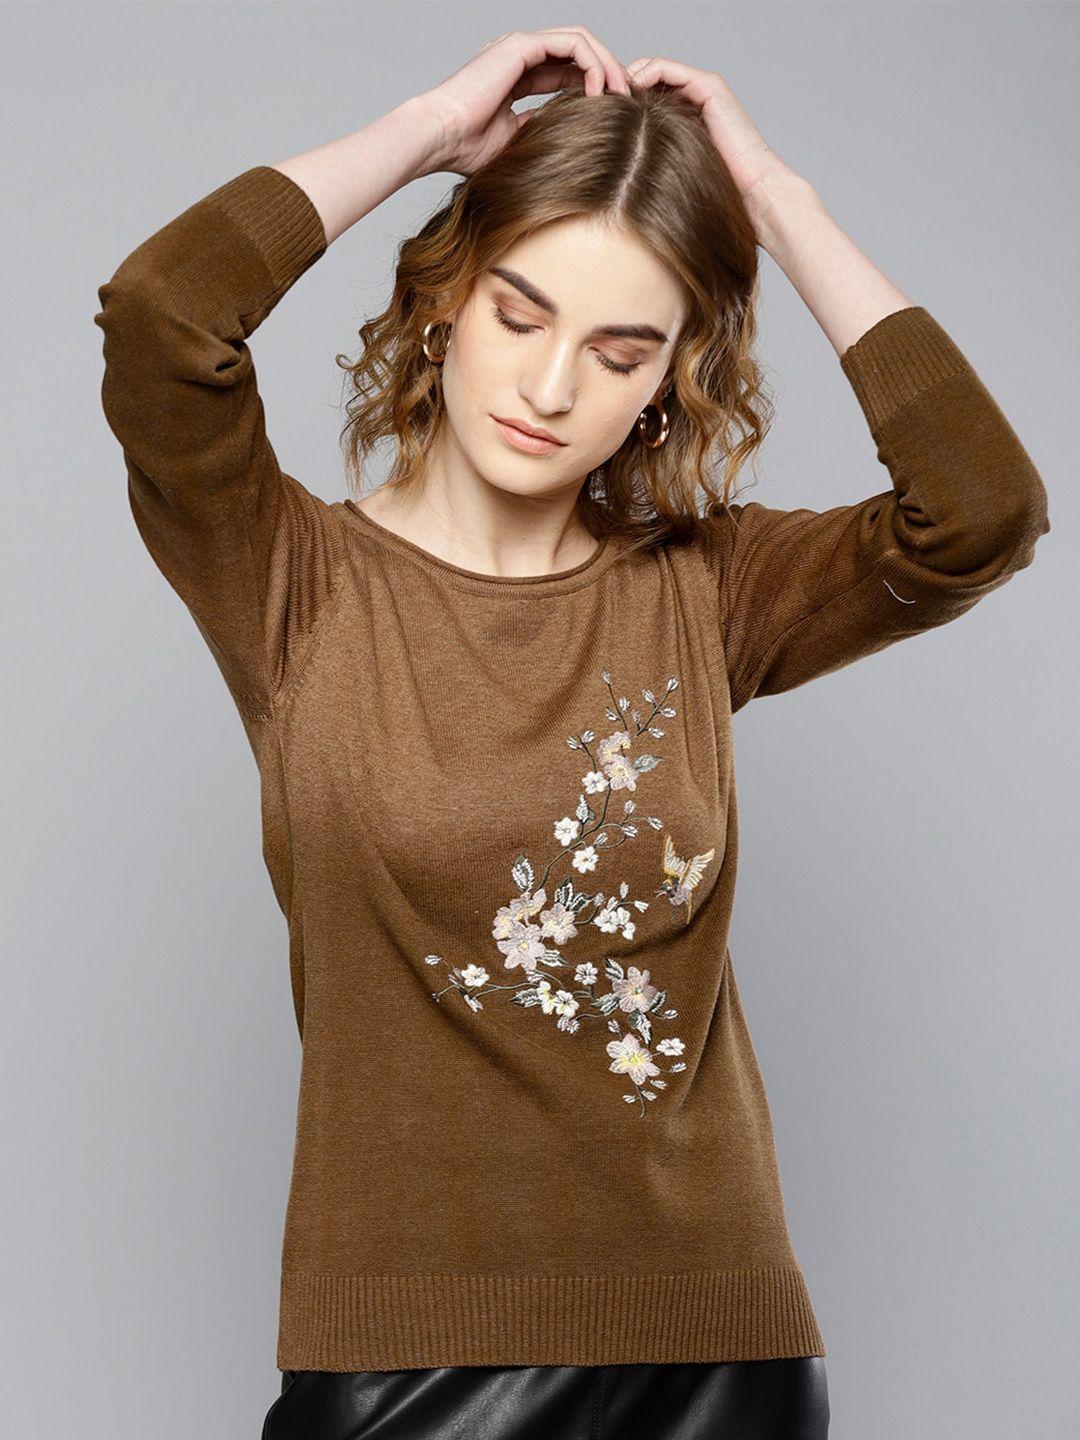 marie claire women floral woollen pullover with embroidered detail